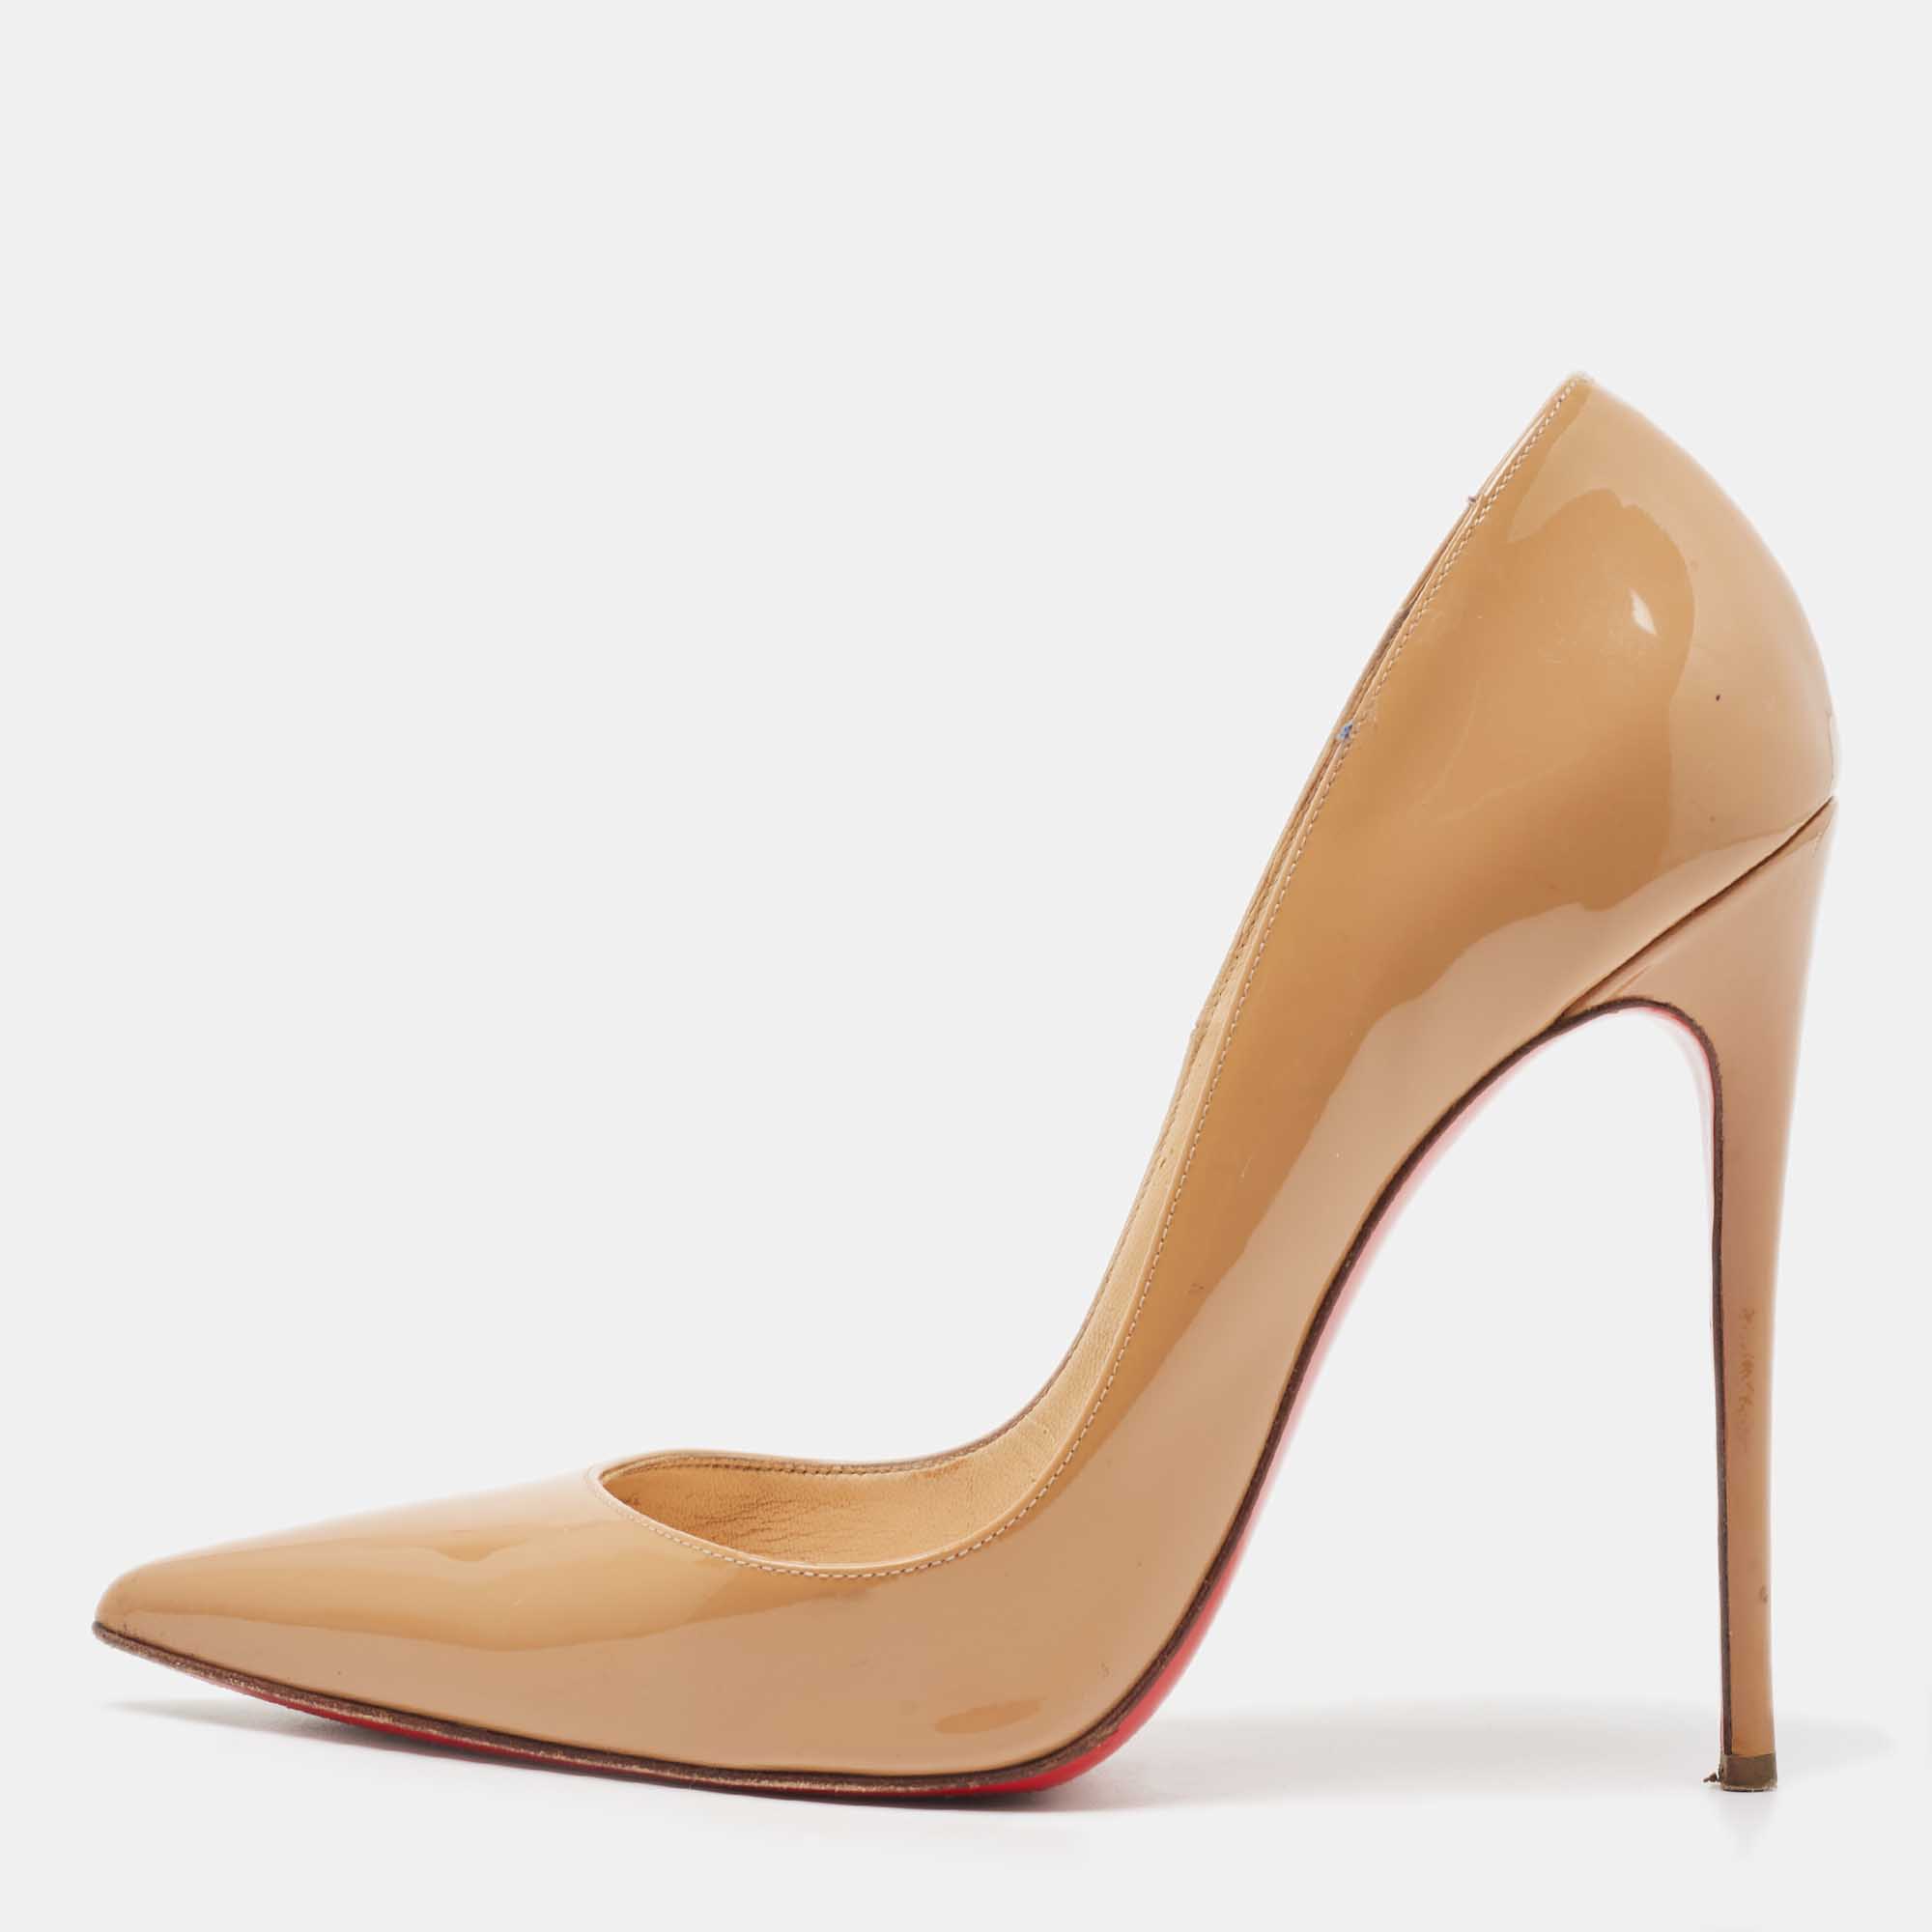 

Christian Louboutin Beige Patent Leather So Kate Pumps Size